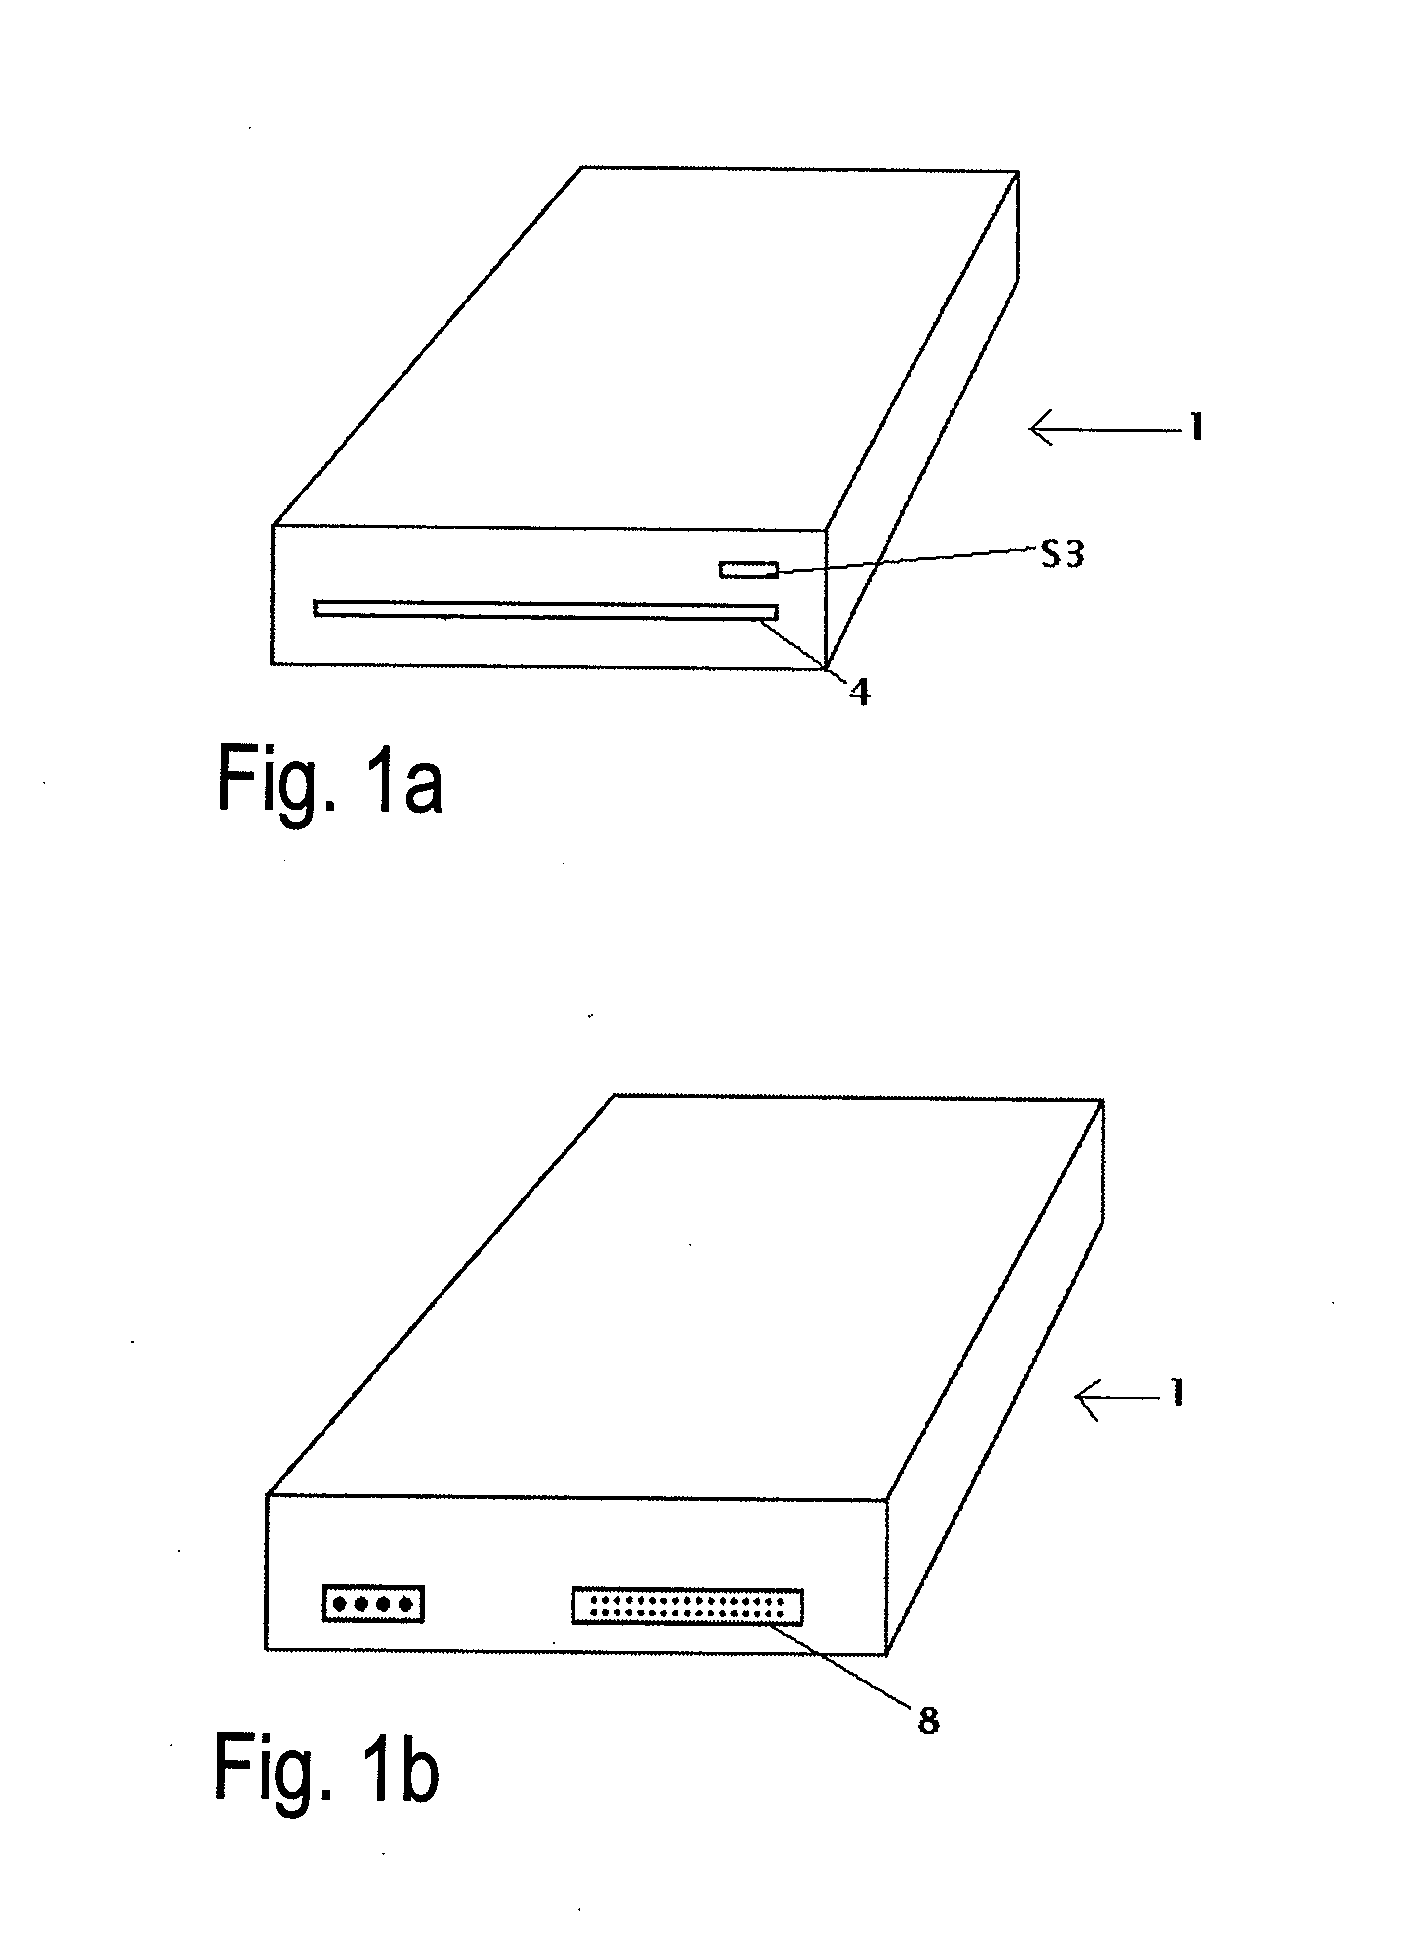 Method and Device for Accessing Microforms